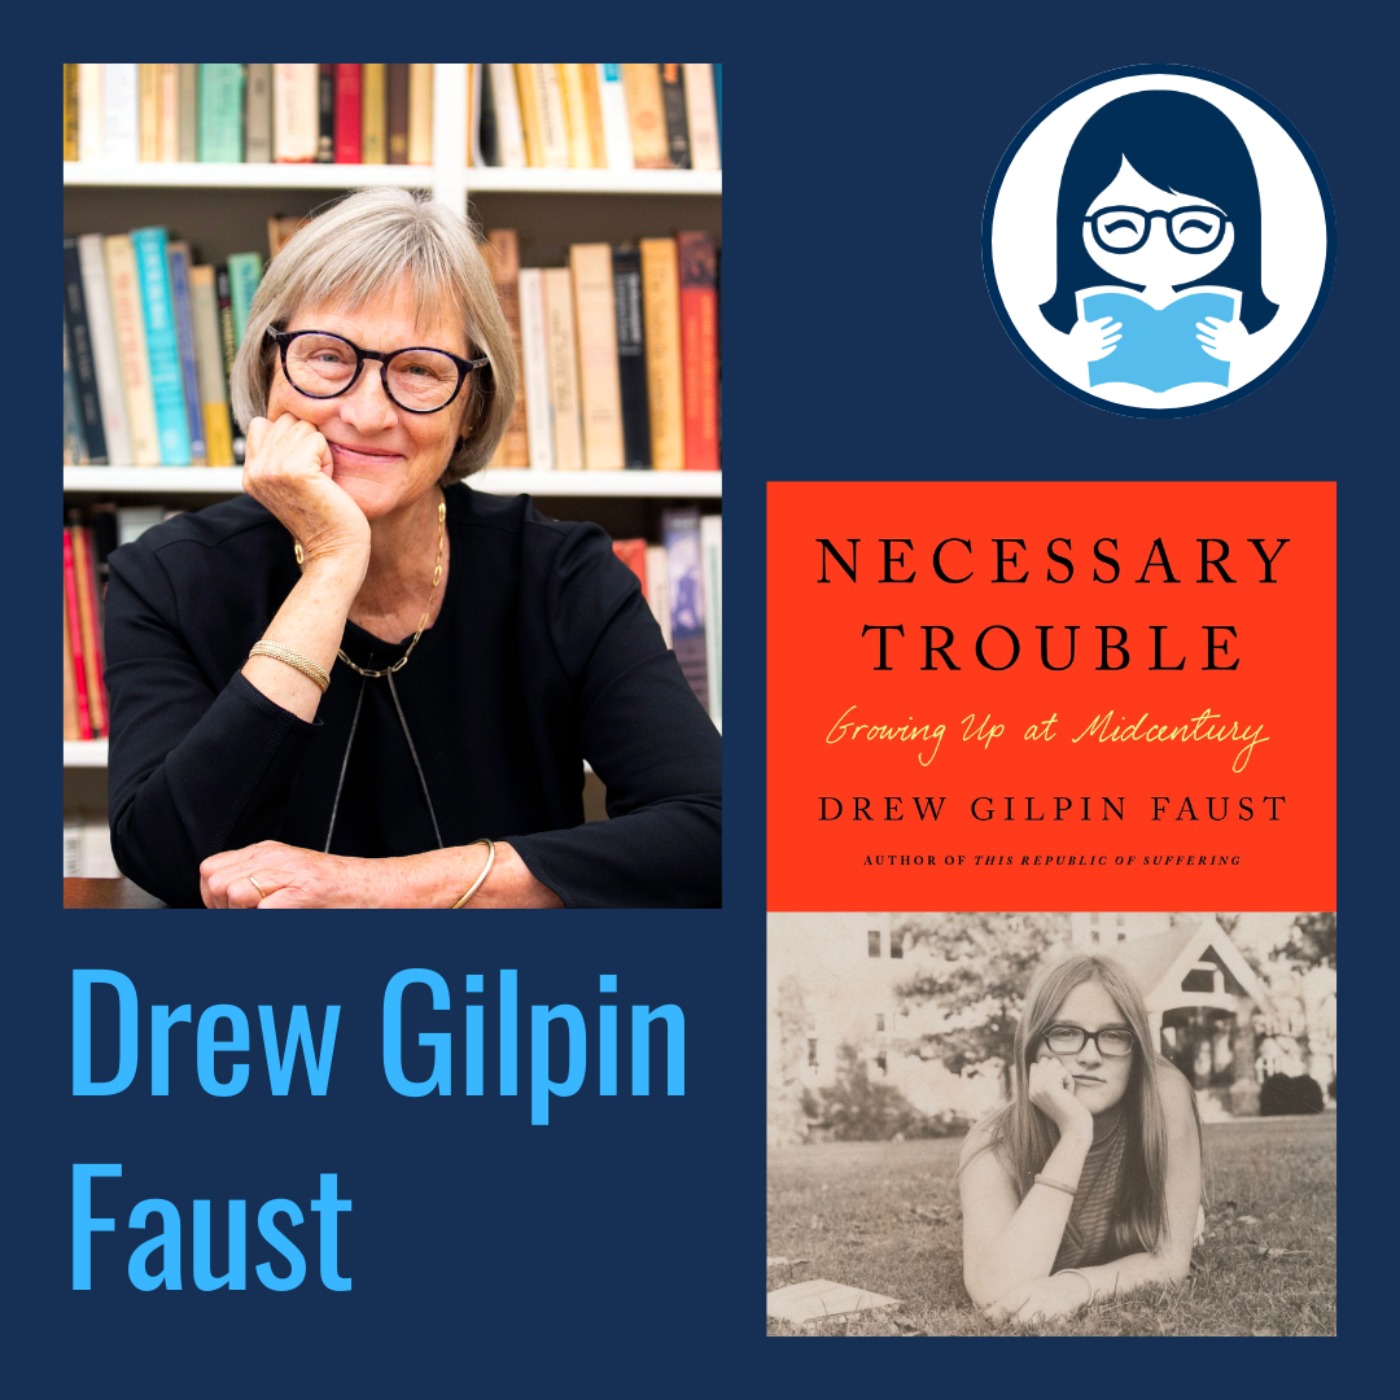 Drew Gilpin Faust, NECESSARY TROUBLE: Growing Up at Midcentury